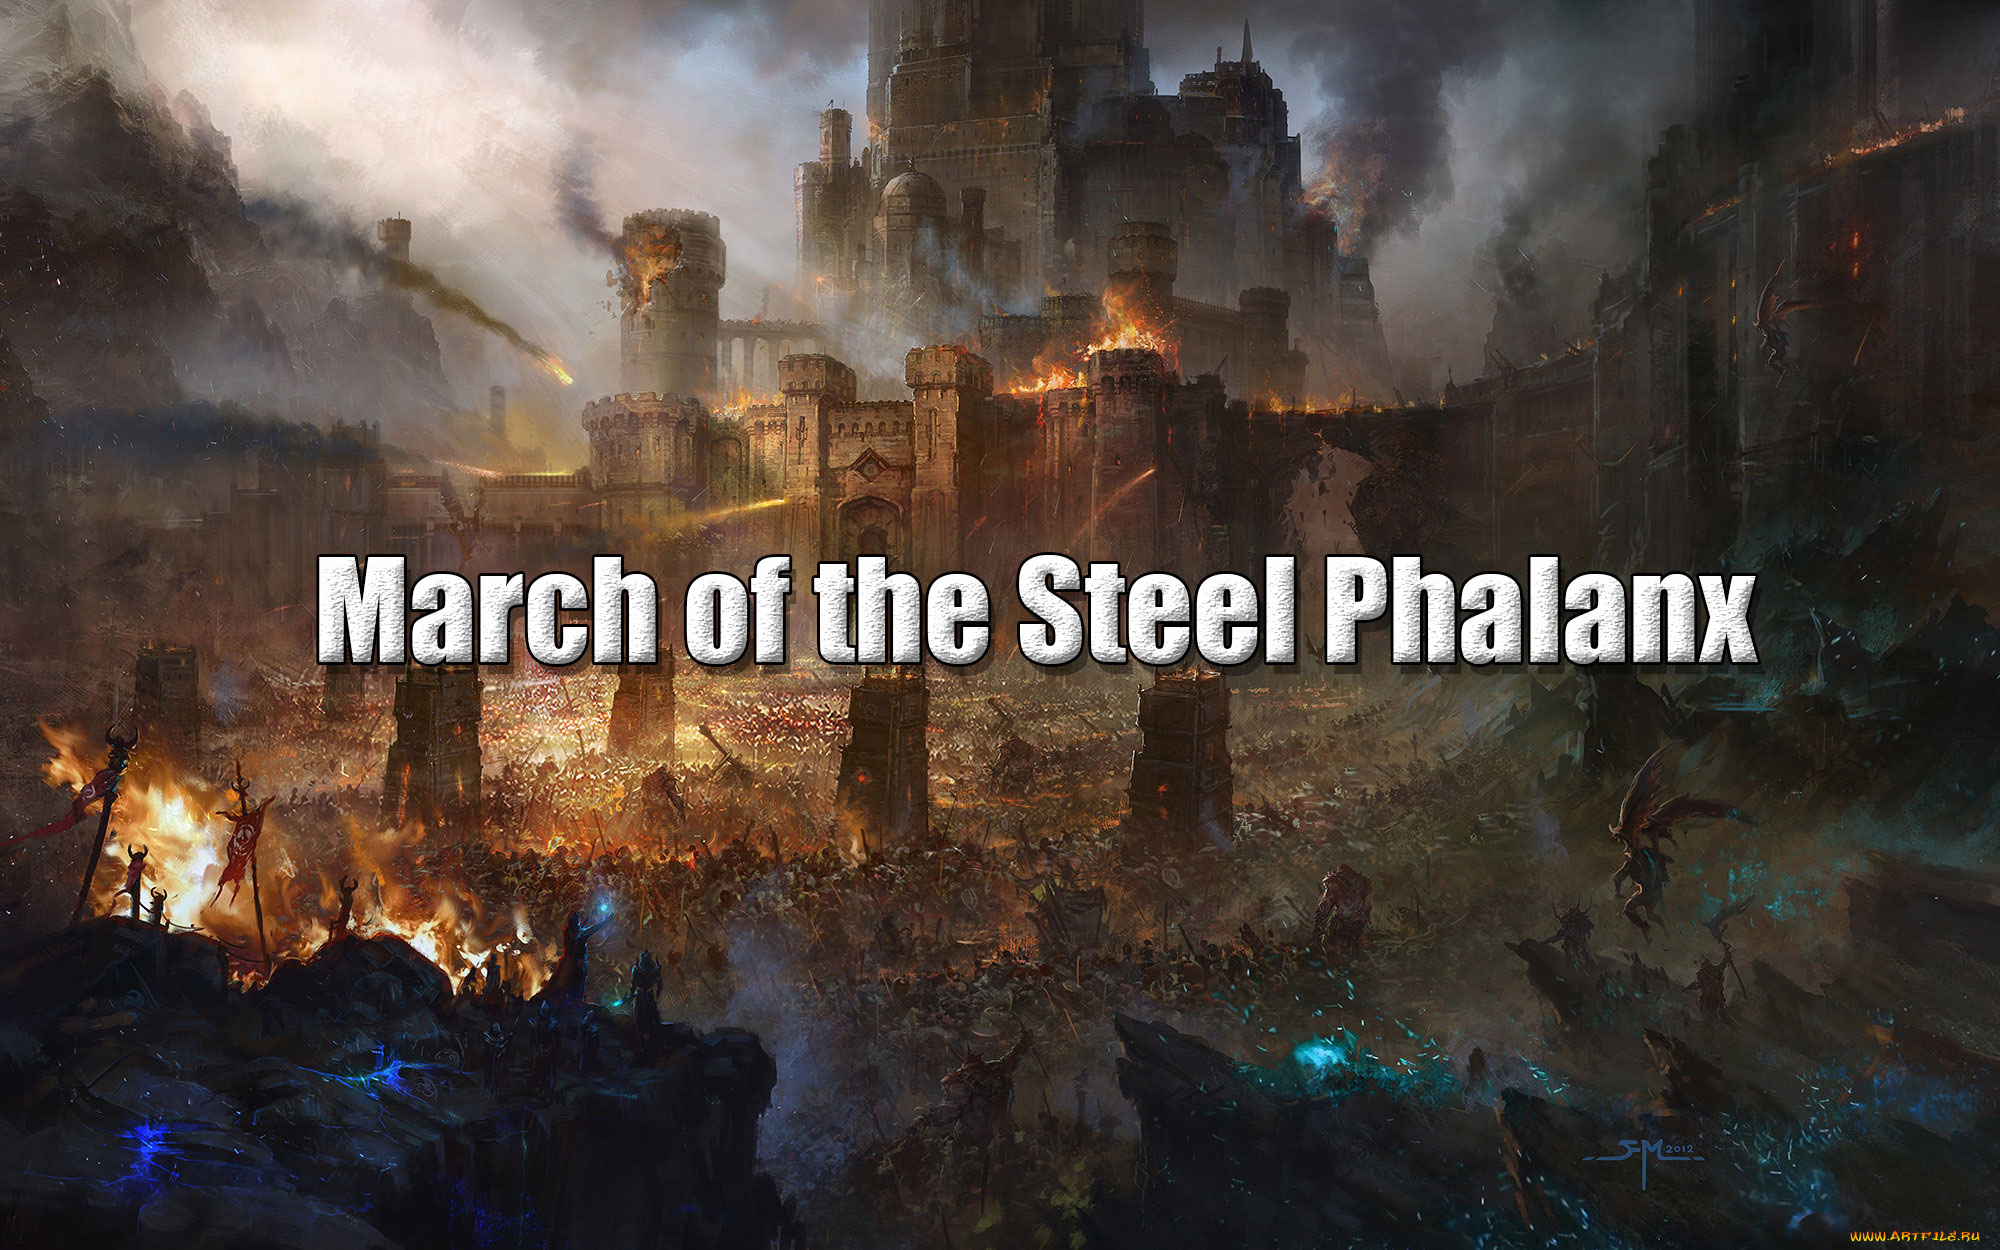 March of the Steel Phalanx, Andrey Lalenkov